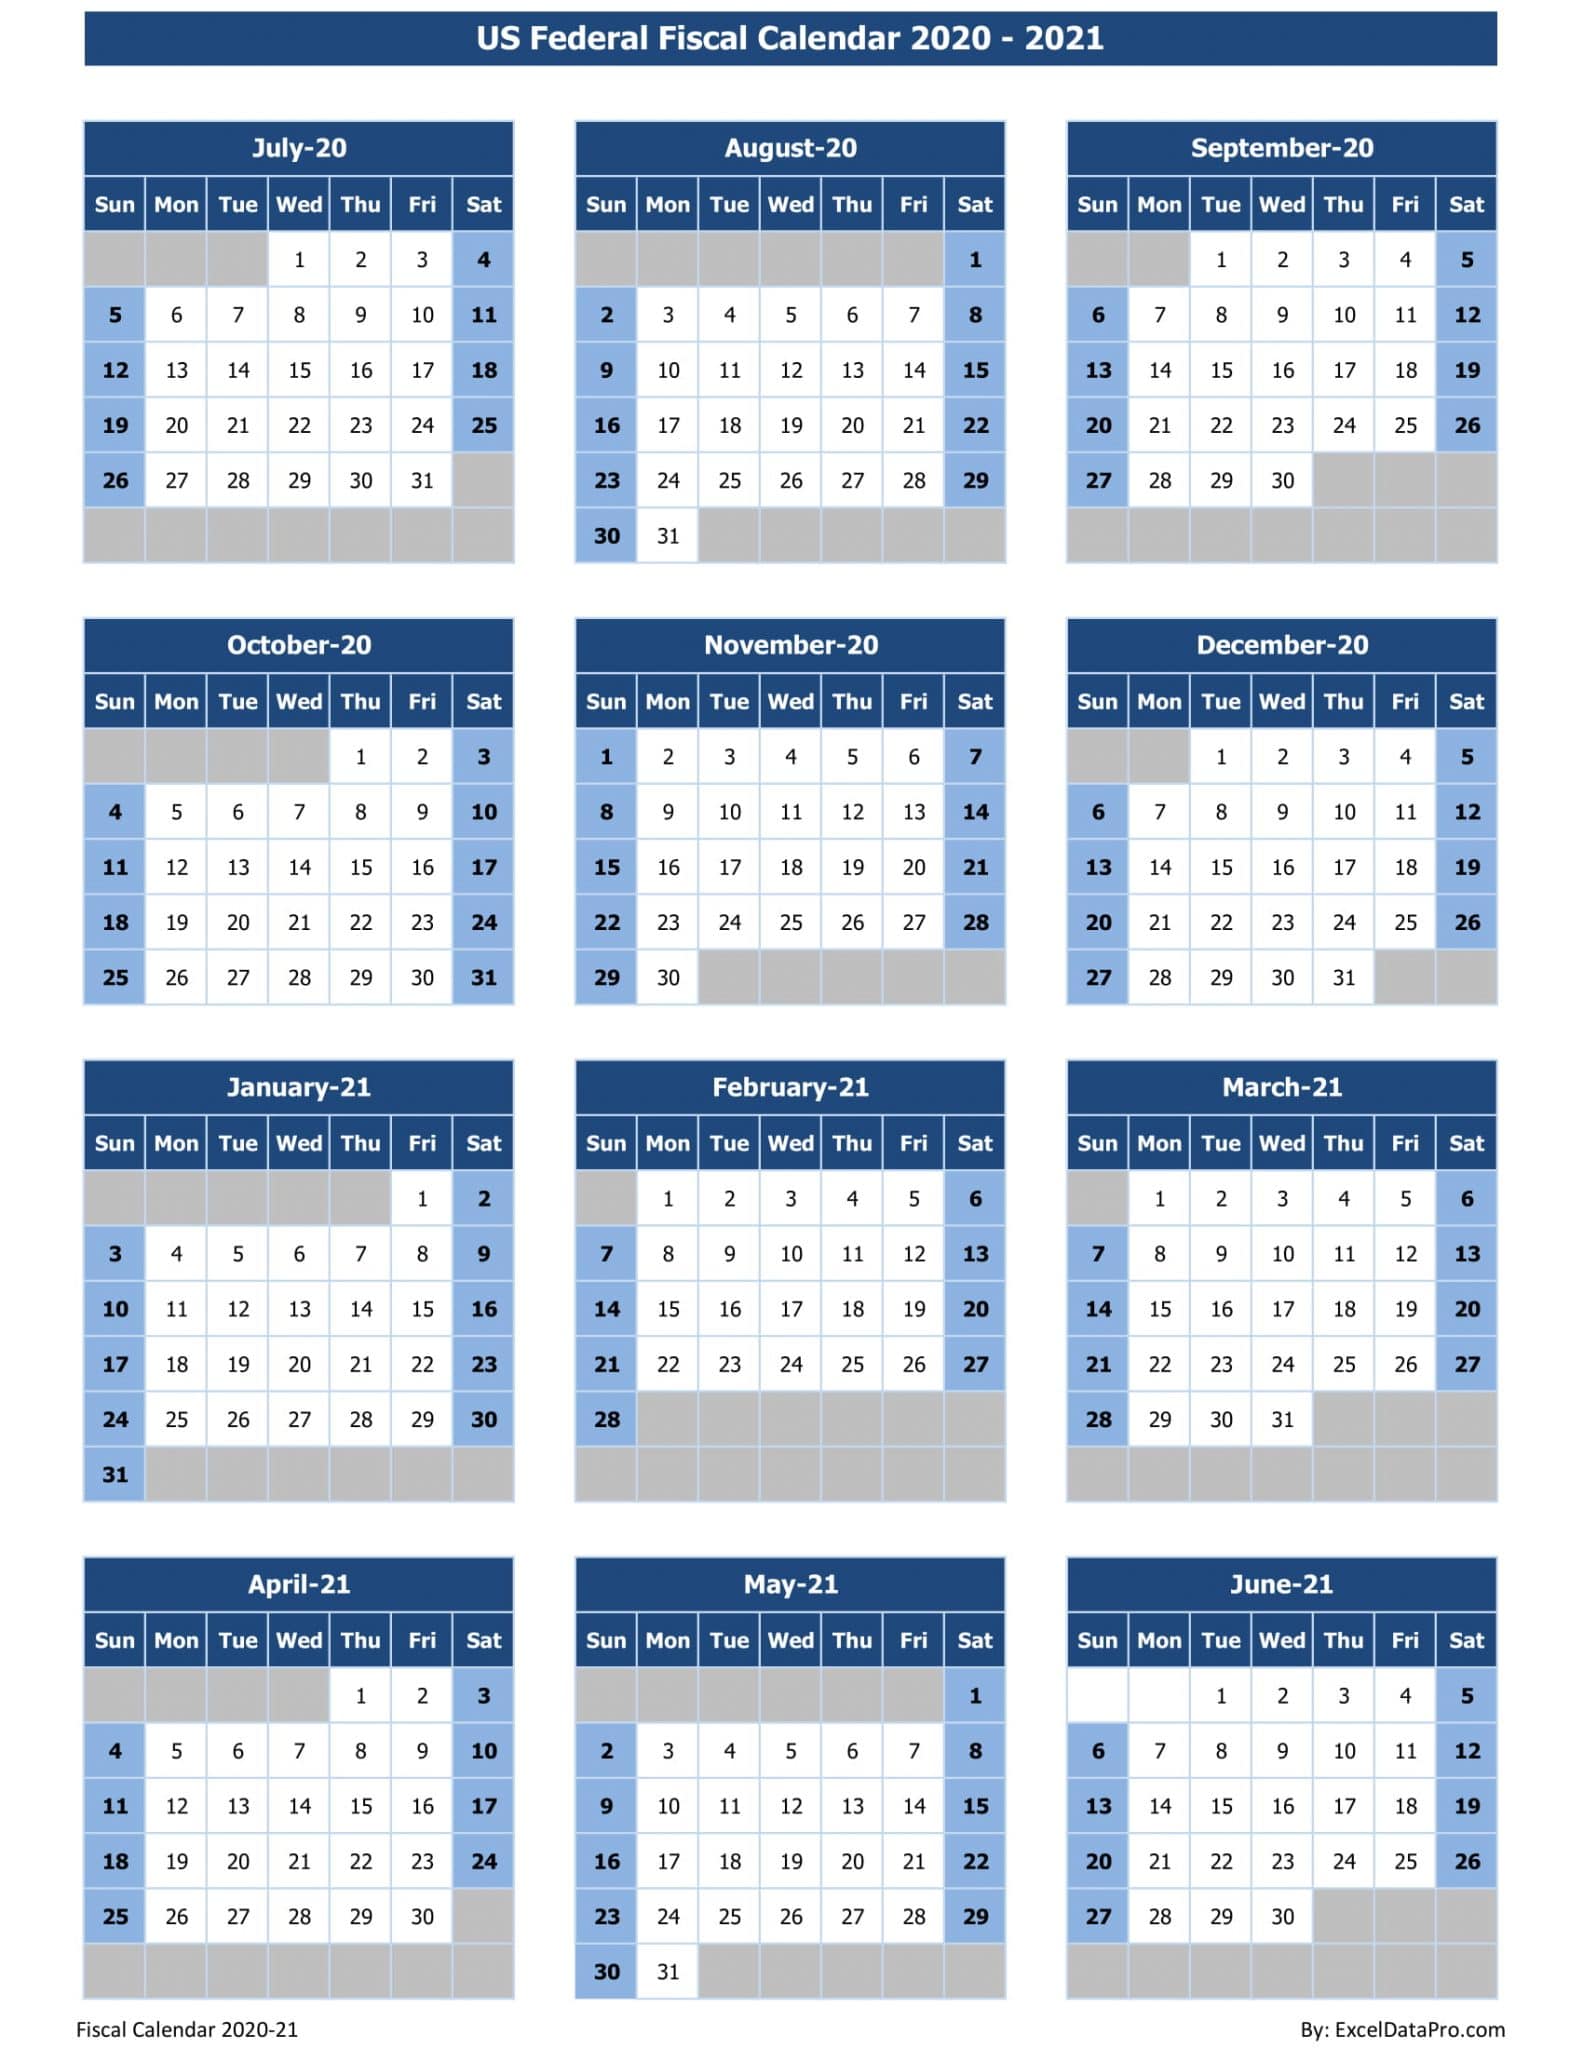 Download US Federal Fiscal Calendar 202021 Excel Template ExcelDataPro